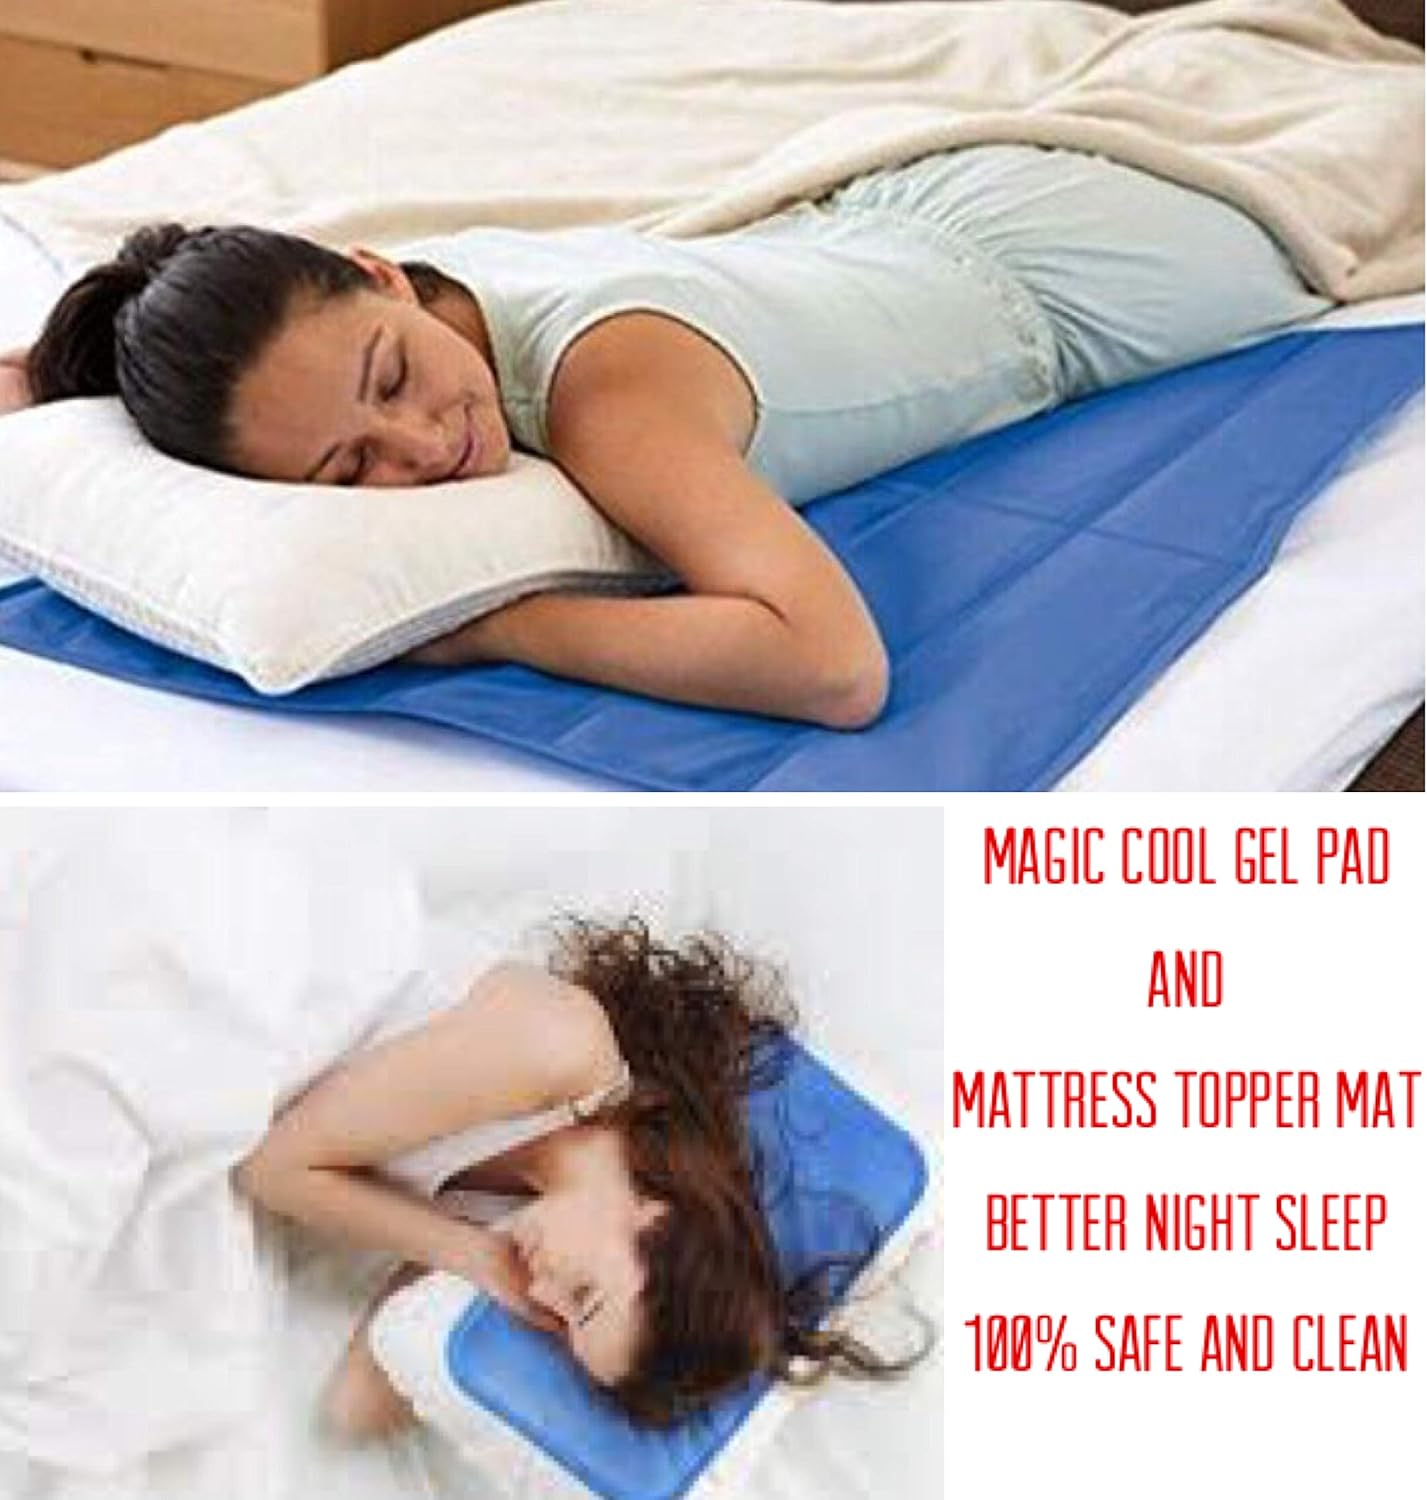 ADEPTNA MAGIC MULTI FUNCTIONAL SELF COOLING GEL PAD MATTRESS TOPPER MAT WITH COOLING GEL PILLOW - BETTER NIGHTS SLEEP - 100% SAFE AND CLEAN